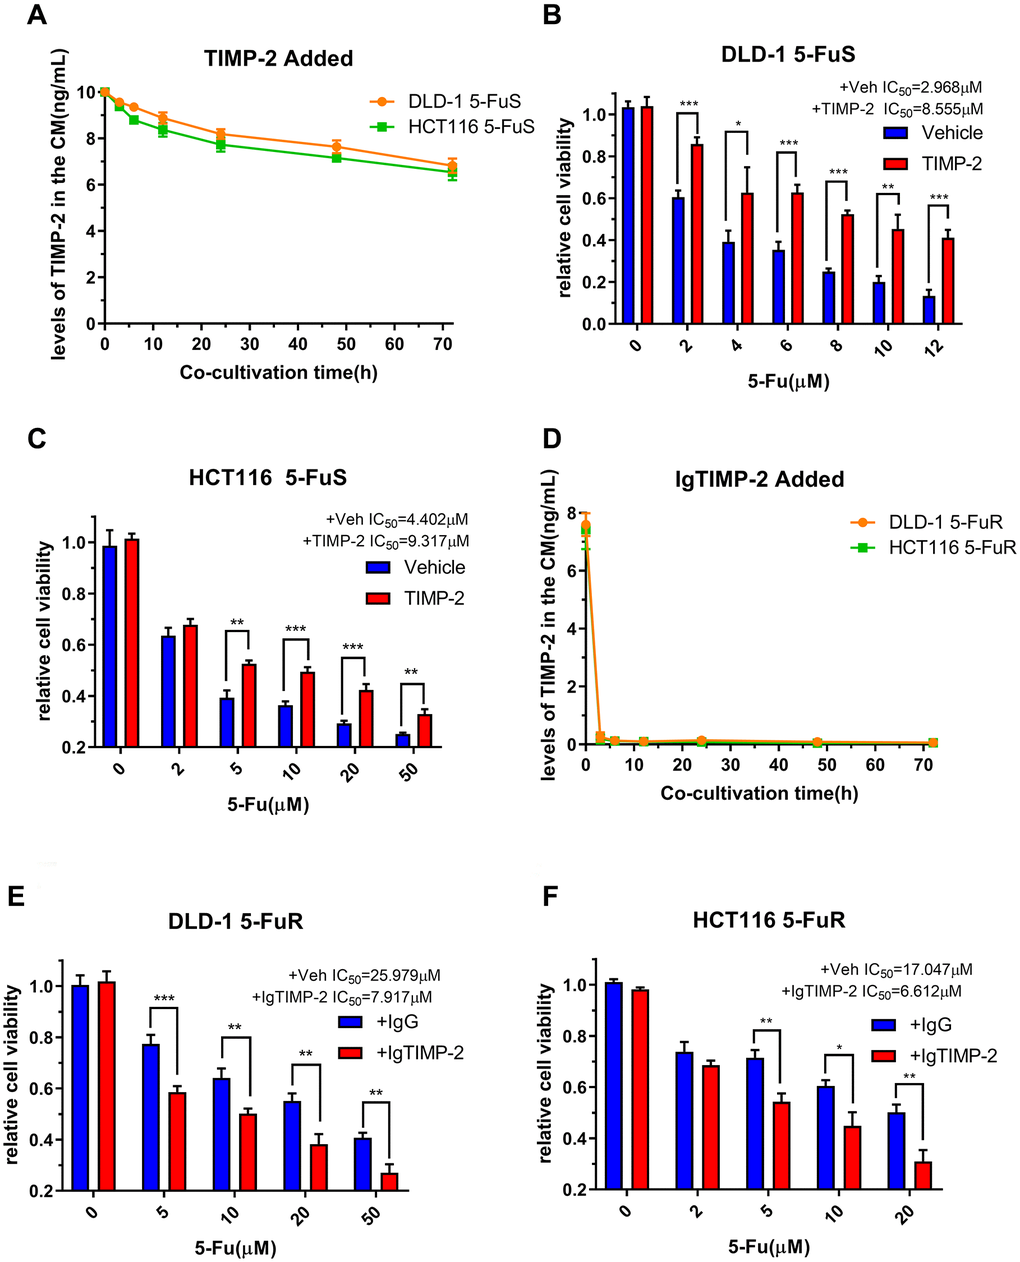 TIMP-2 promotes CRC cell resistance to 5-Fu through an autocrine mechanism. (A) Changes in TIMP-2 protein levels in the cell culture medium (CM) of DLD-1 5-FuS cells and HCT116 5-FuS cells 3 days after treatment with 10 ng/mL of recombinant TIMP-2. (B, C) Relative cell viabilities of DLD-1 5-FuS cells and HCT116 5-FuS cells under increasing concentrations of 5-Fu for 3 days after culture with 10 ng/mL of recombinant TIMP-2. (D) Changes in TIMP-2 protein levels in the cell culture medium (CM) of DLD-1 5-FuR cells and HCT116 5-FuR cells for 3 days of culture with 5 μg/mL of TIMP-2 neutralizing antibody. (E, F) Relative cell viabilities of DLD-1 5-FuR cells and HCT116 5-FuR cells under increasing concentrations of 5-Fu for 3 days of culture with control IgG or 5 μg/mL of TIMP-2 neutralizing antibody. Data from triplicate wells for 3 independent experiments. *p **p ***p t-test or one-way ANOVA.